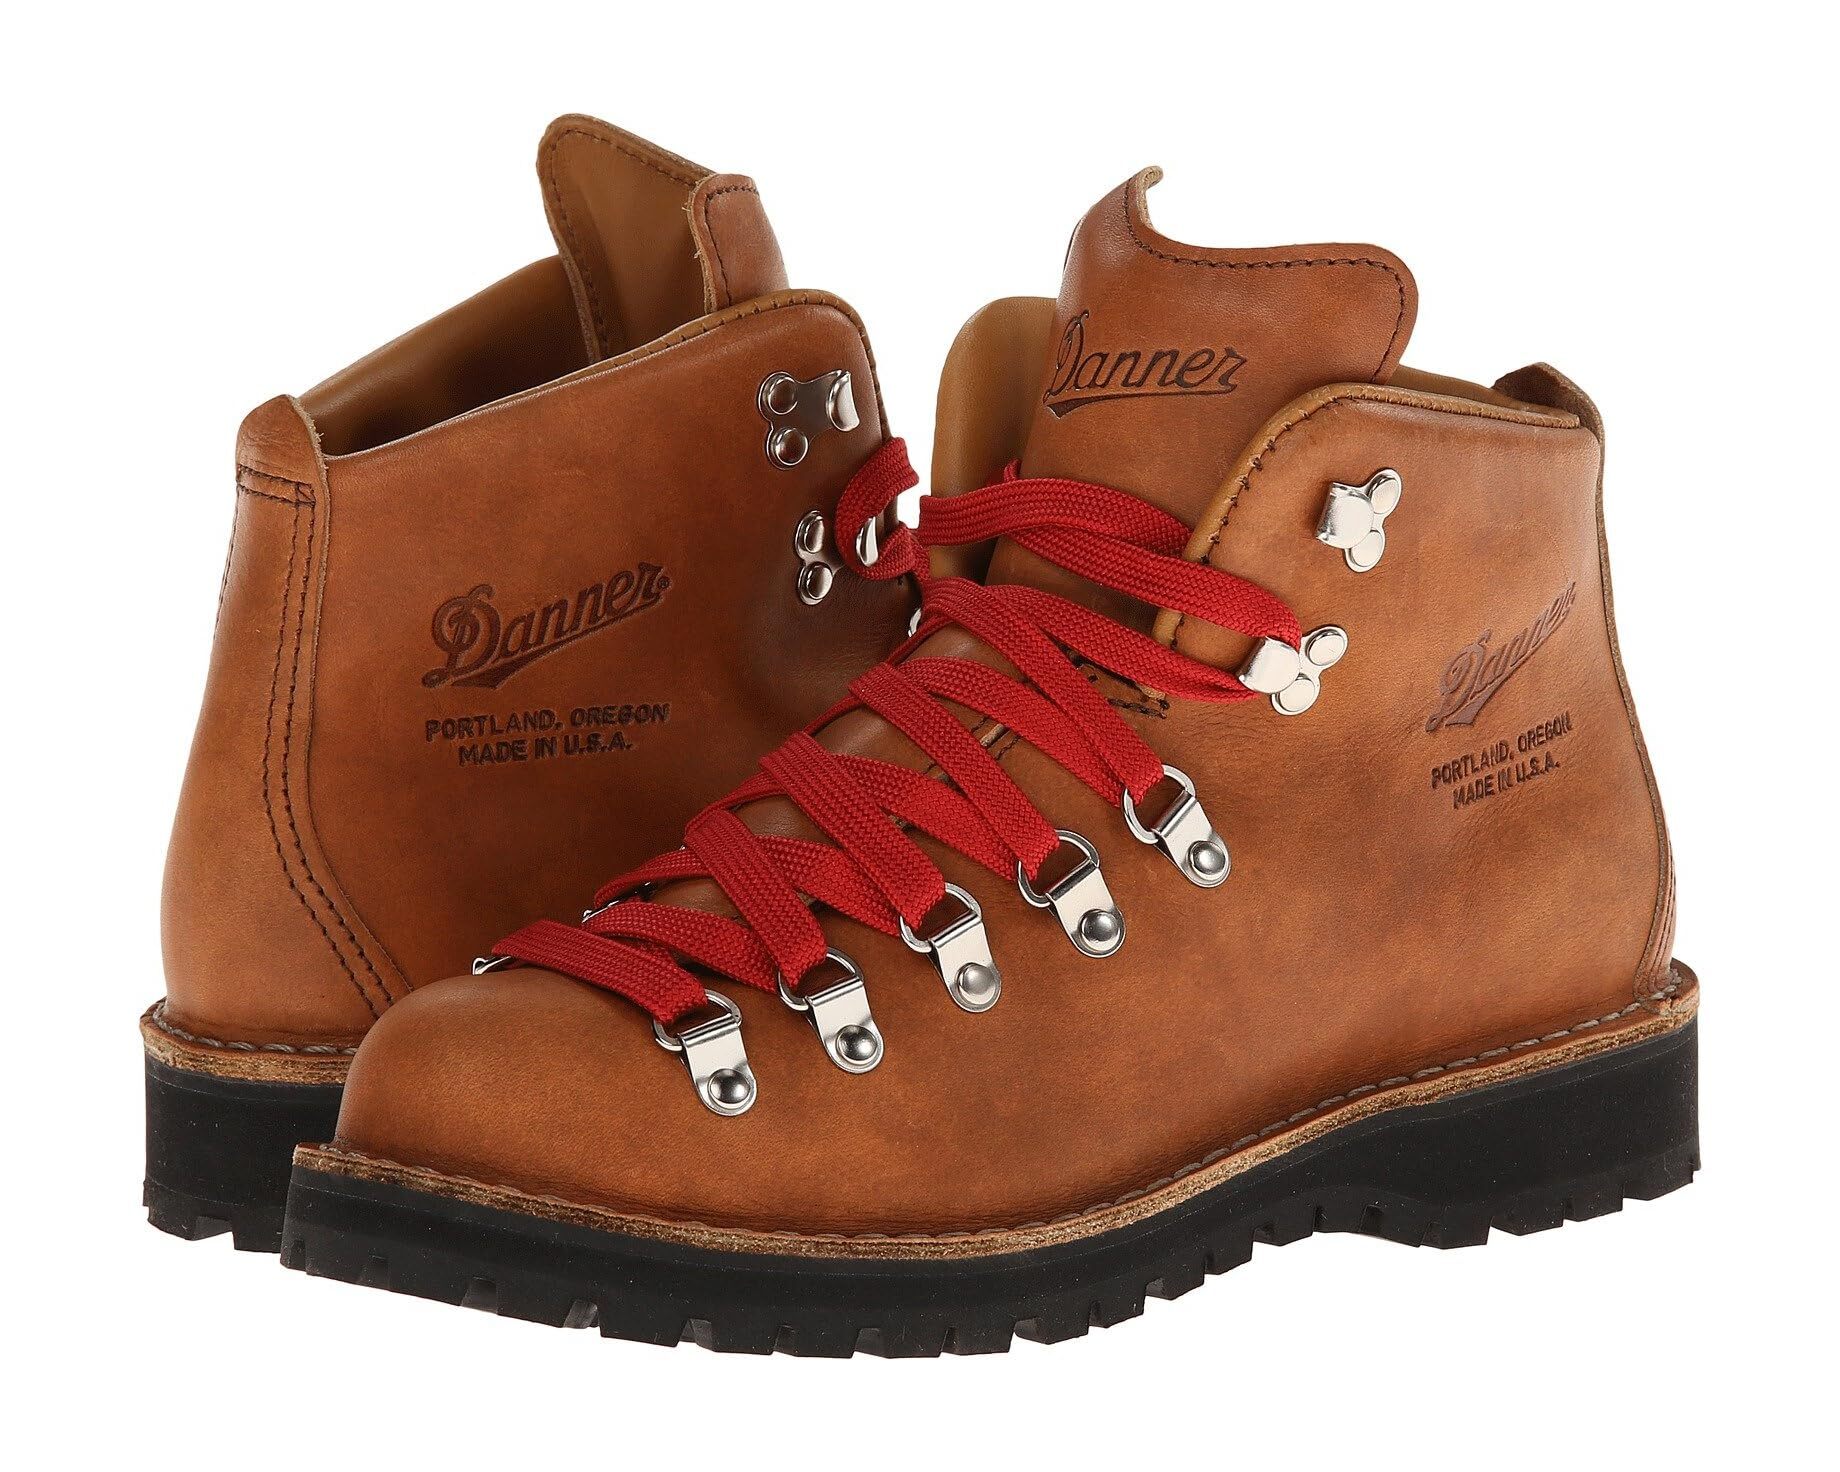 A pair of Danner hiking boots with red laces